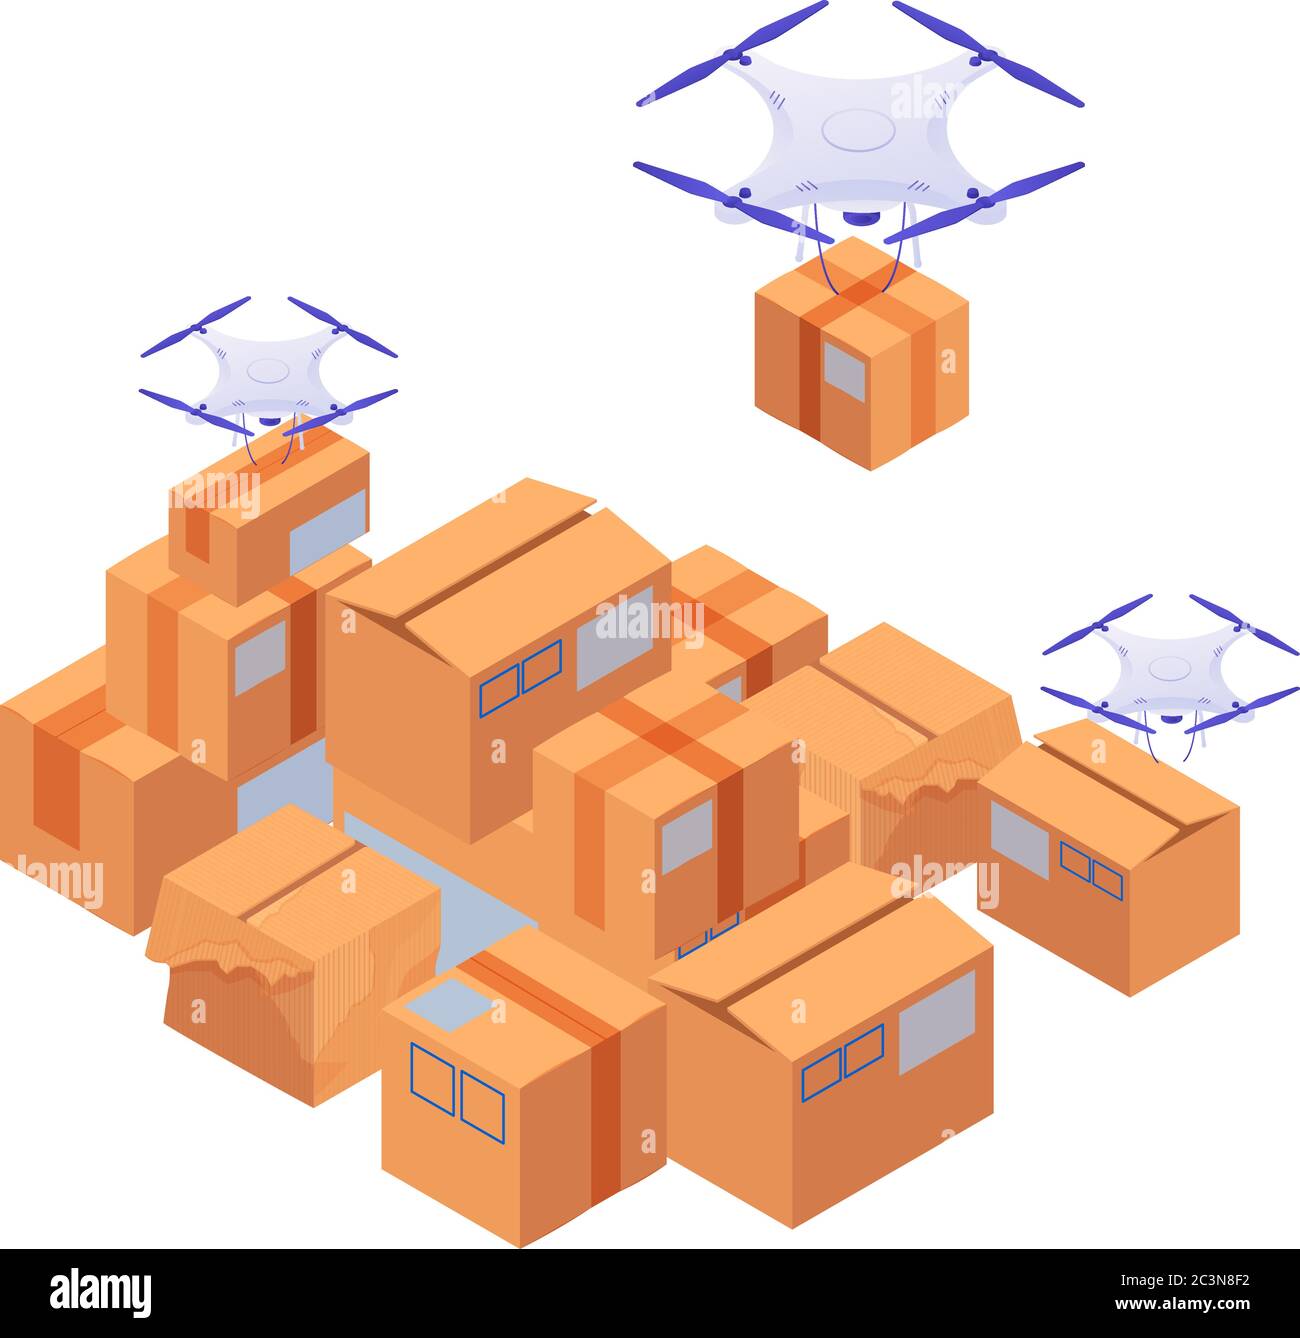 Delivery drones carry and stack boxes isometric illustration. White modern quadrocopters ship sort yellow boxe. Stock Vector